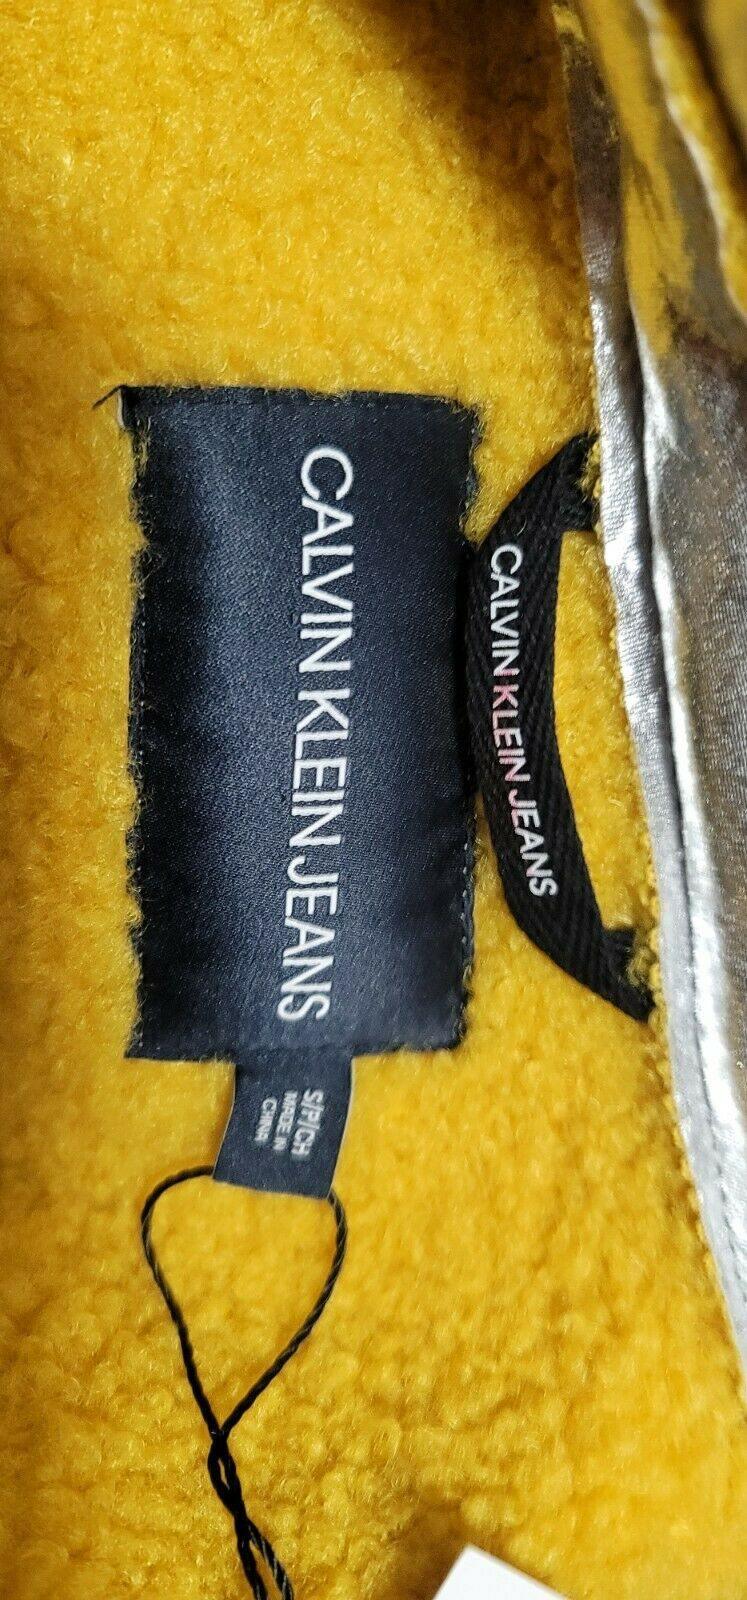 Calvin Klein Jeans Faux Leather Shearling Trucker Silver Yellow Jacket Size US S - SVNYFancy